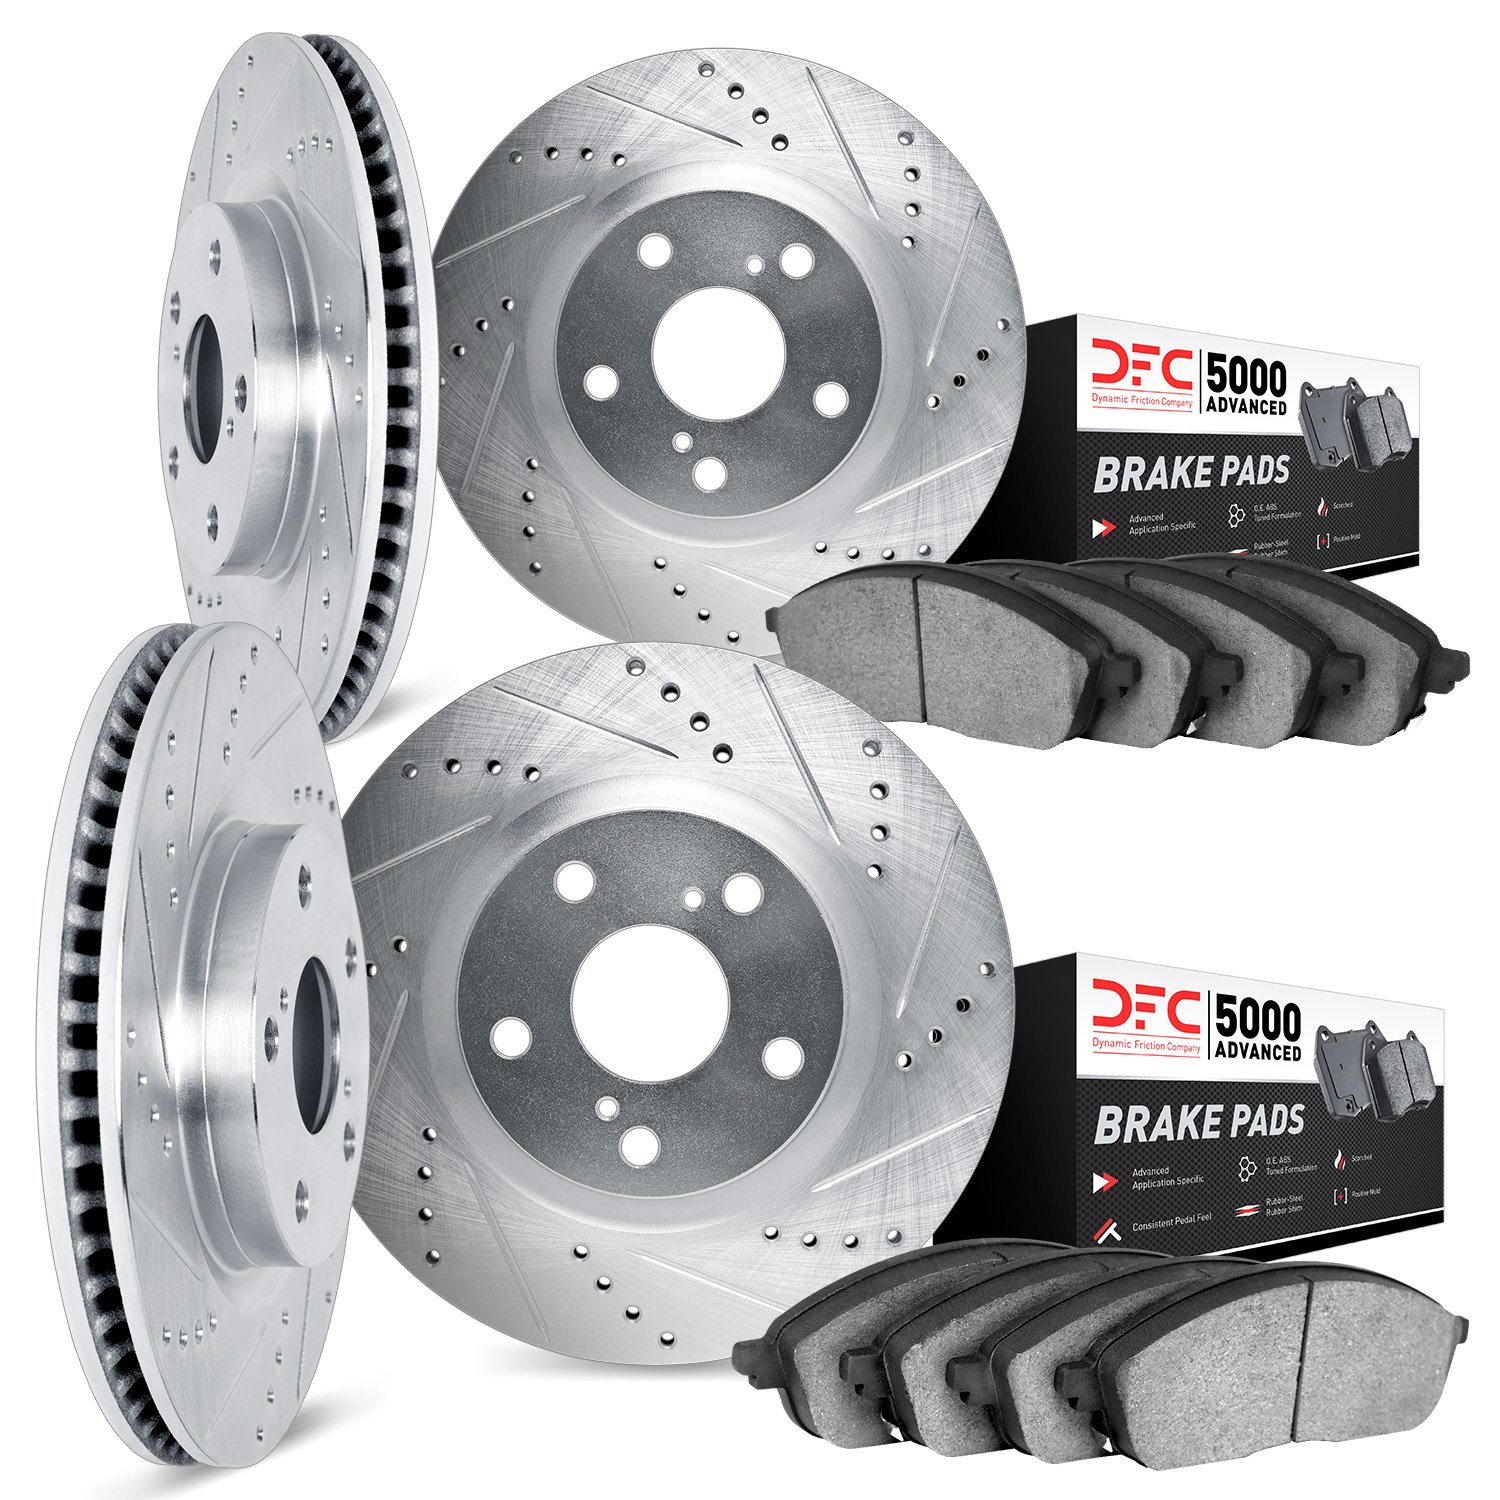 7504-63007 Drilled/Slotted Brake Rotors w/5000 Advanced Brake Pads Kit [Silver], 2019-2019 Mercedes-Benz, Position: Front and Re